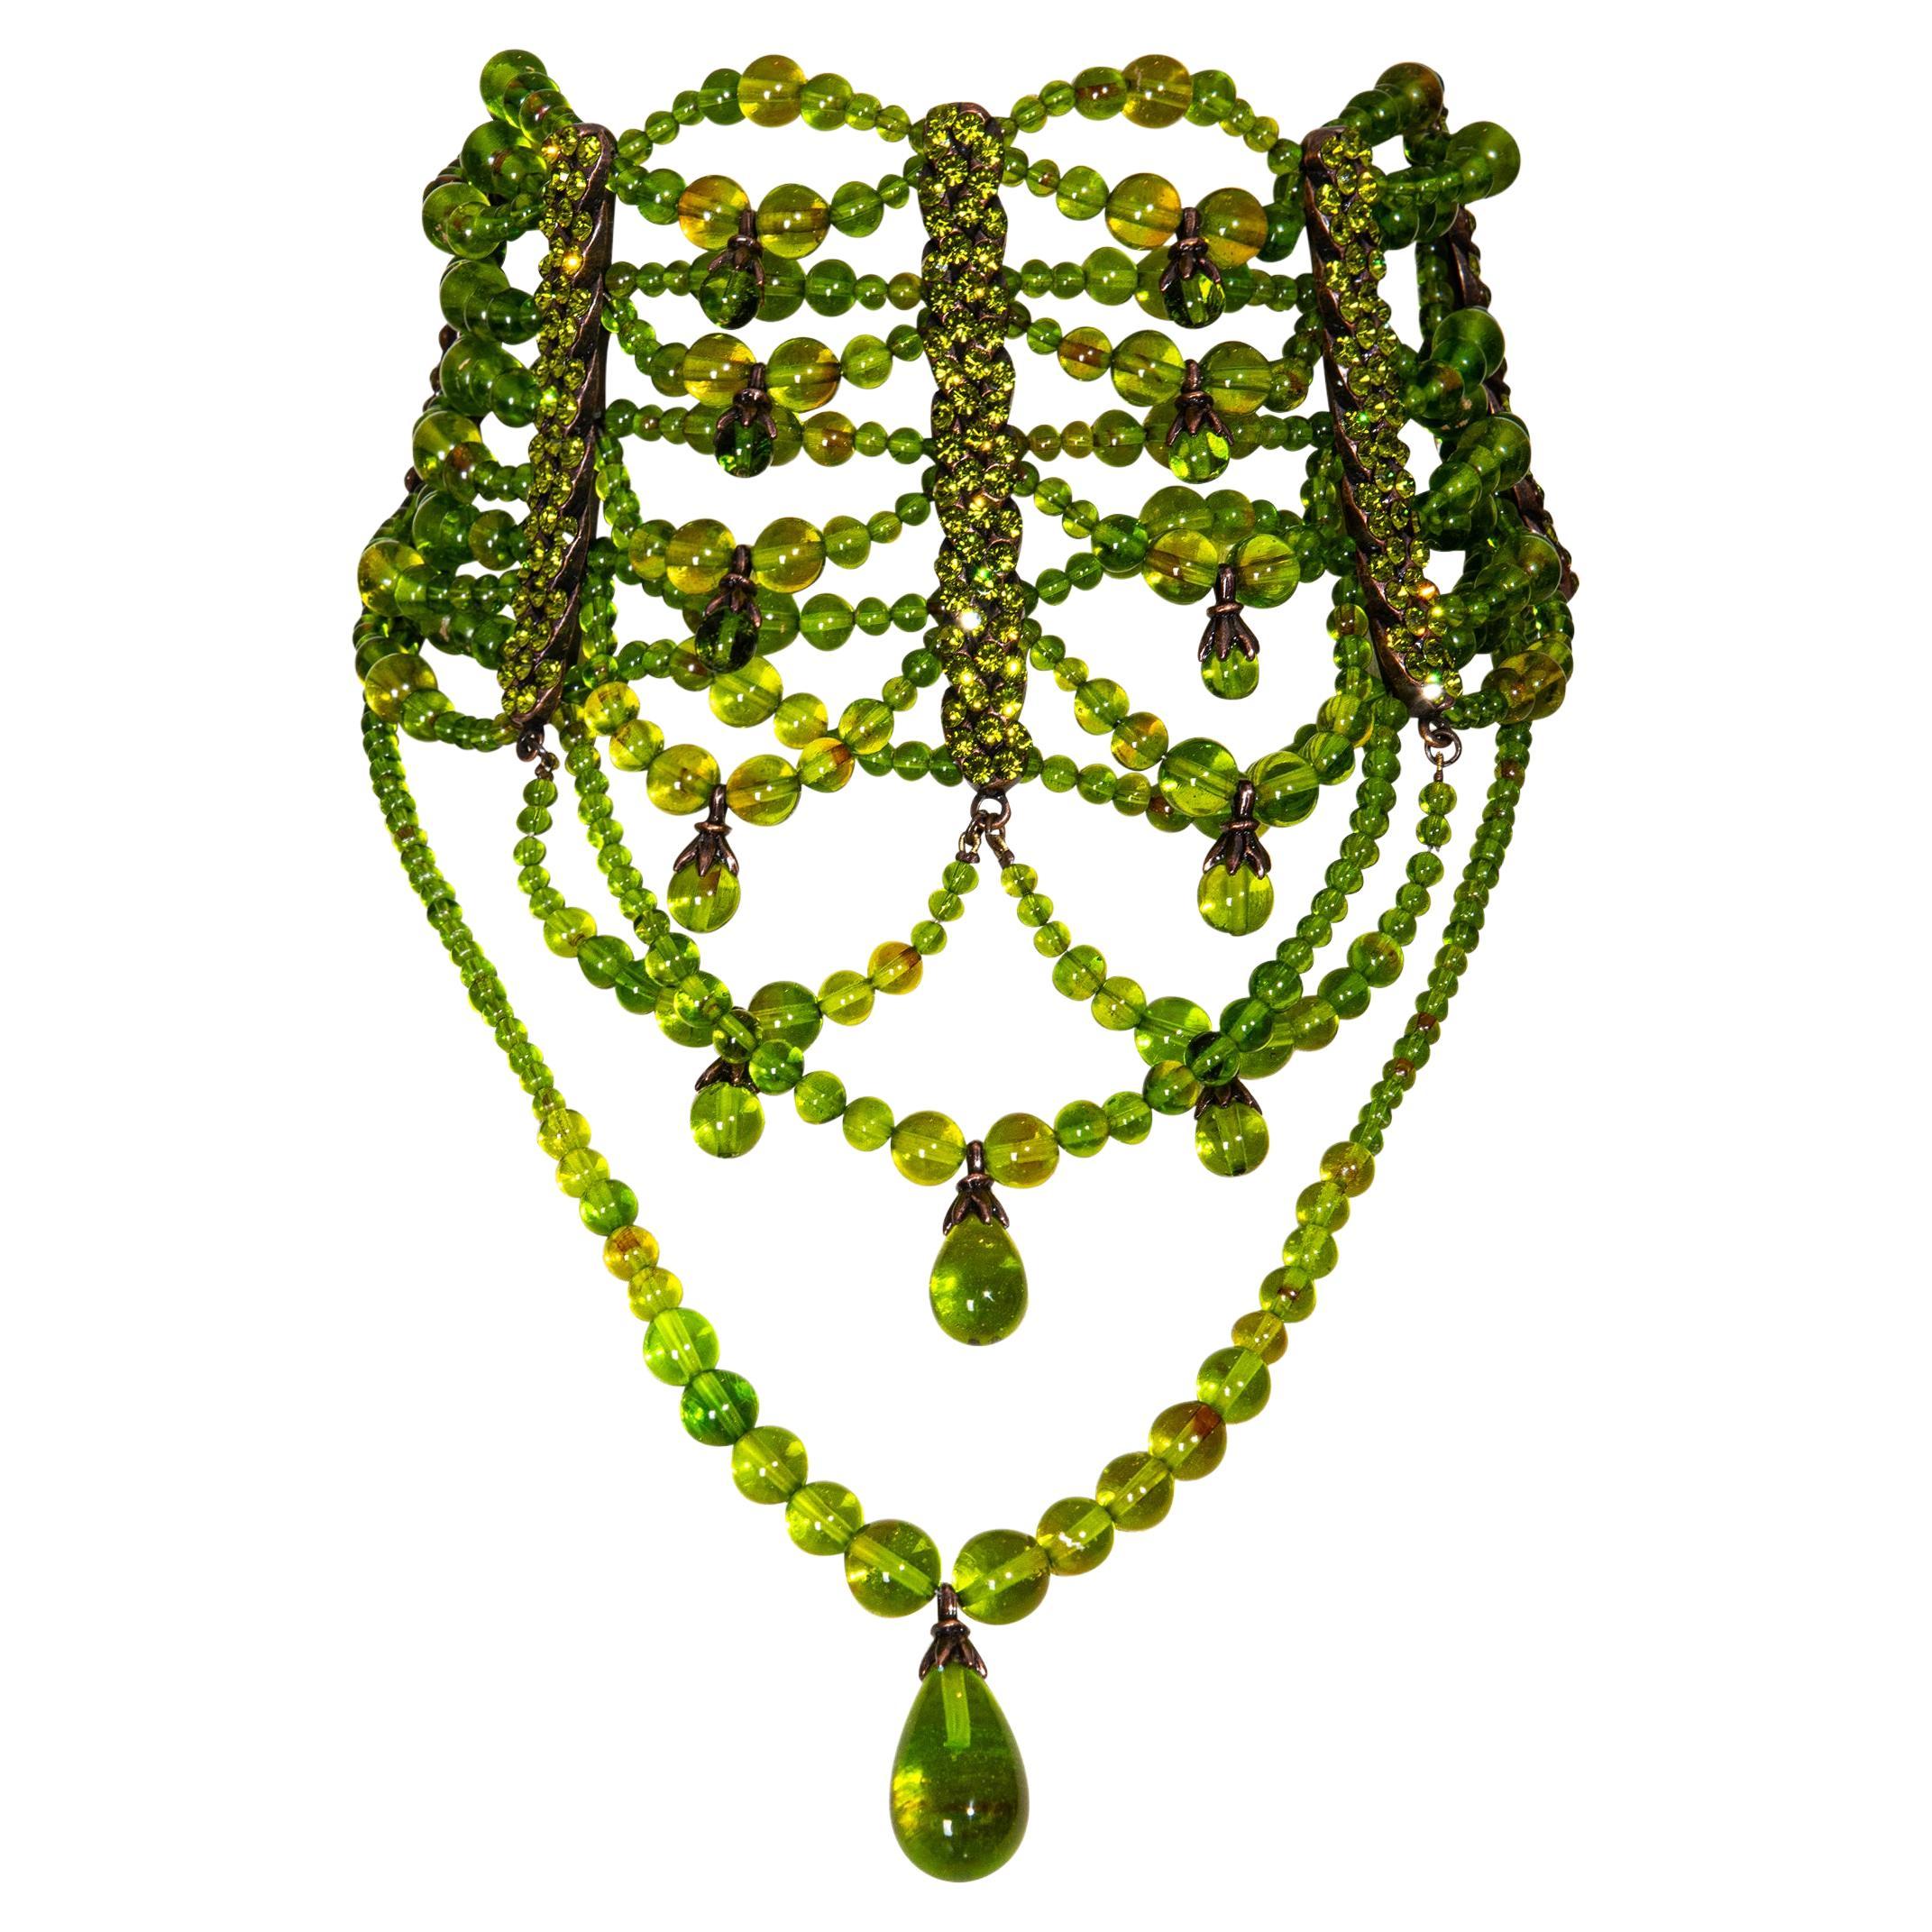 c. A/W 2003 Christian Dior by John Galliano Green Beaded Choker Necklace